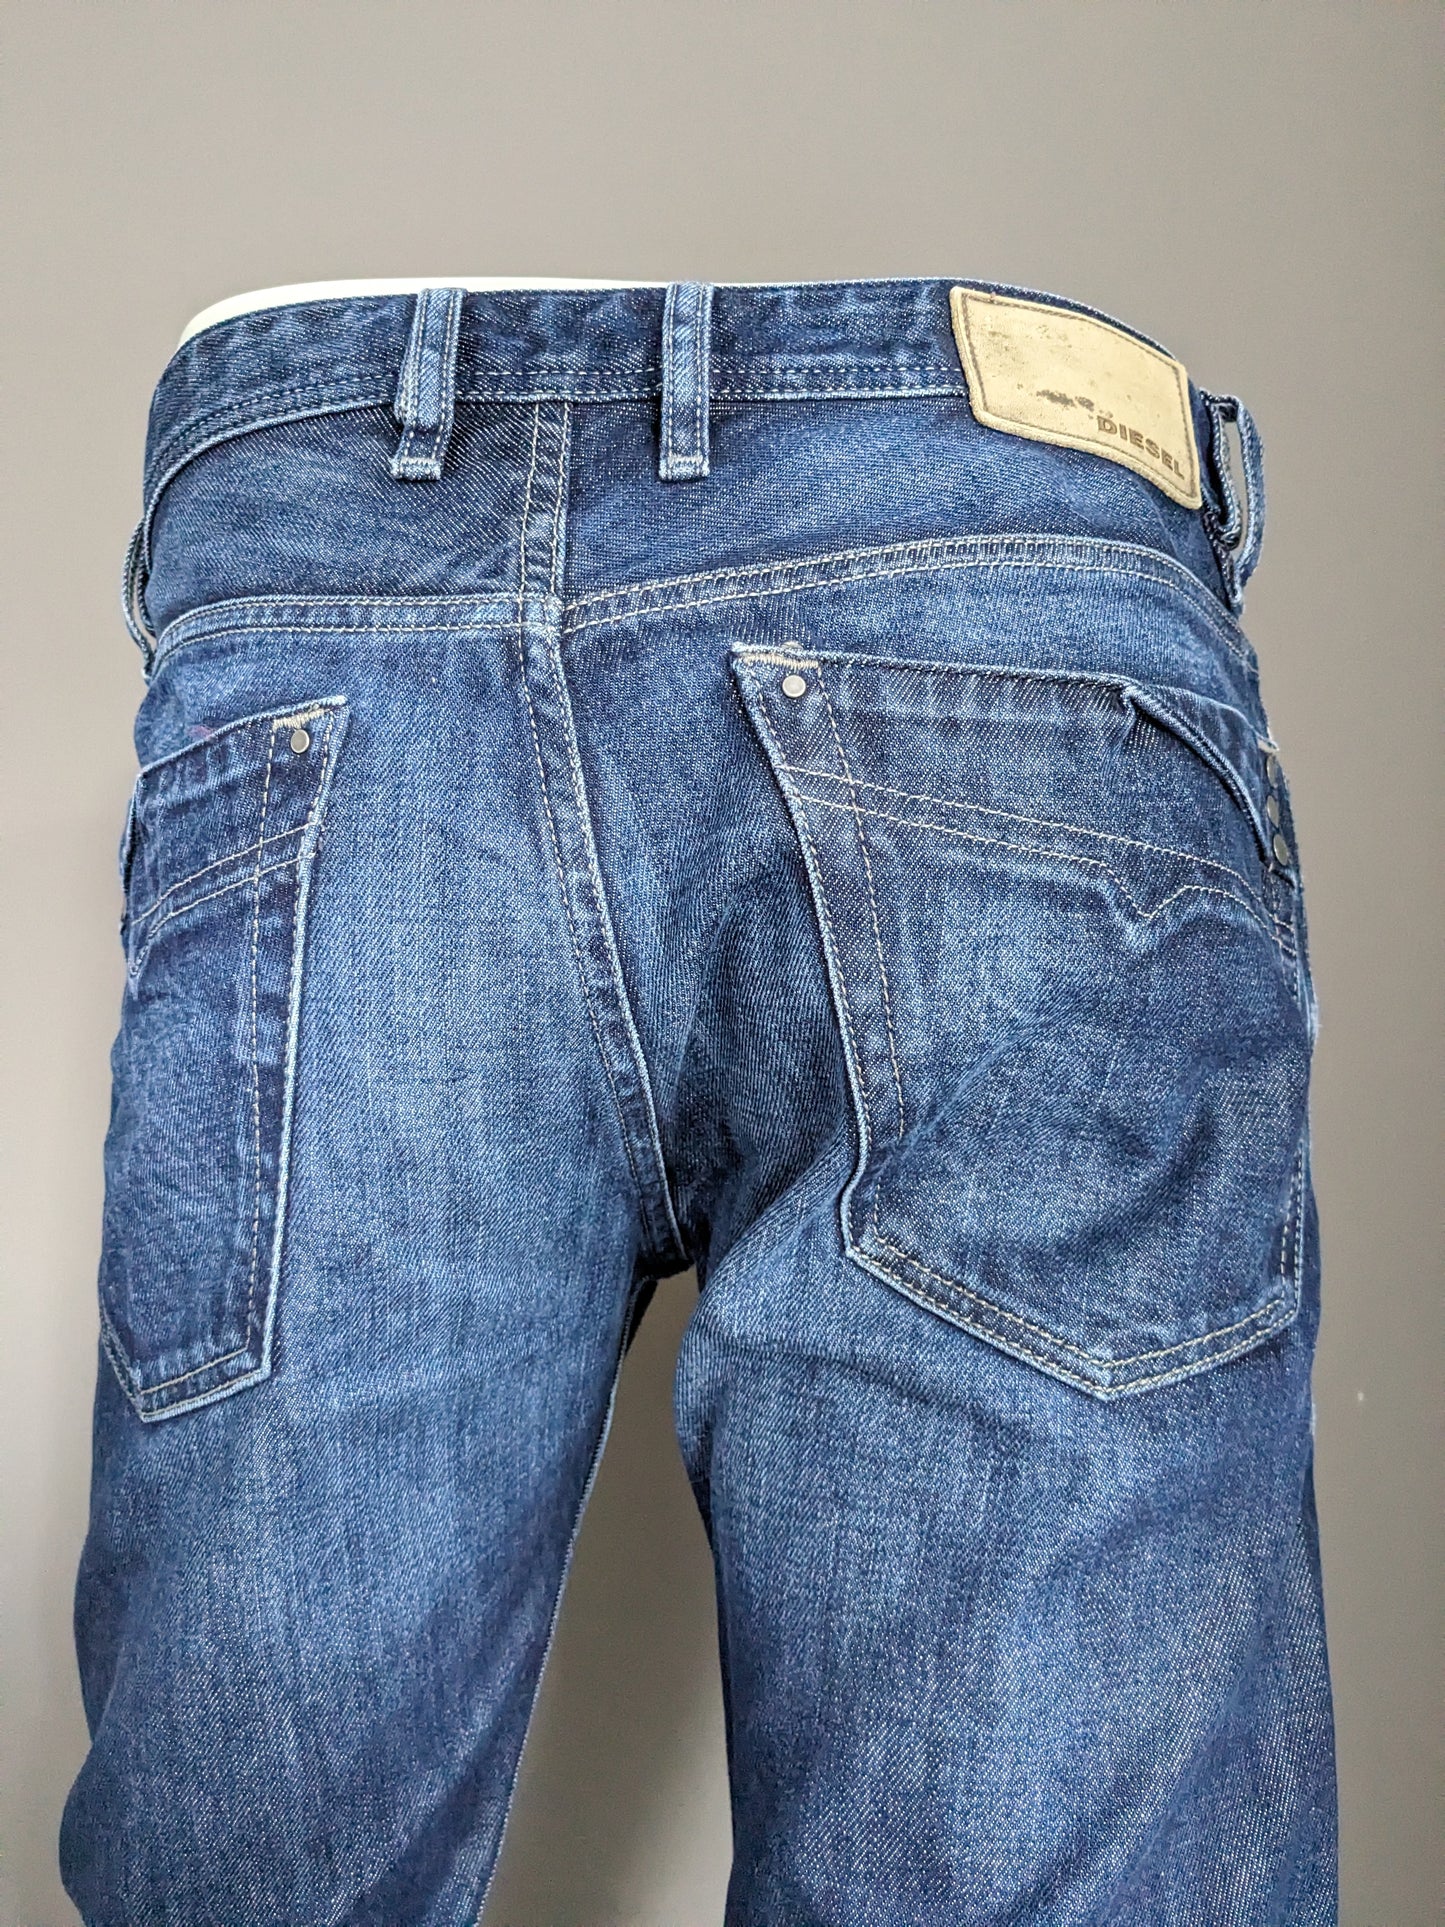 Jeans diesel. Color azul oscuro. Tamaño W31 - L32. Tipo "Mennit".